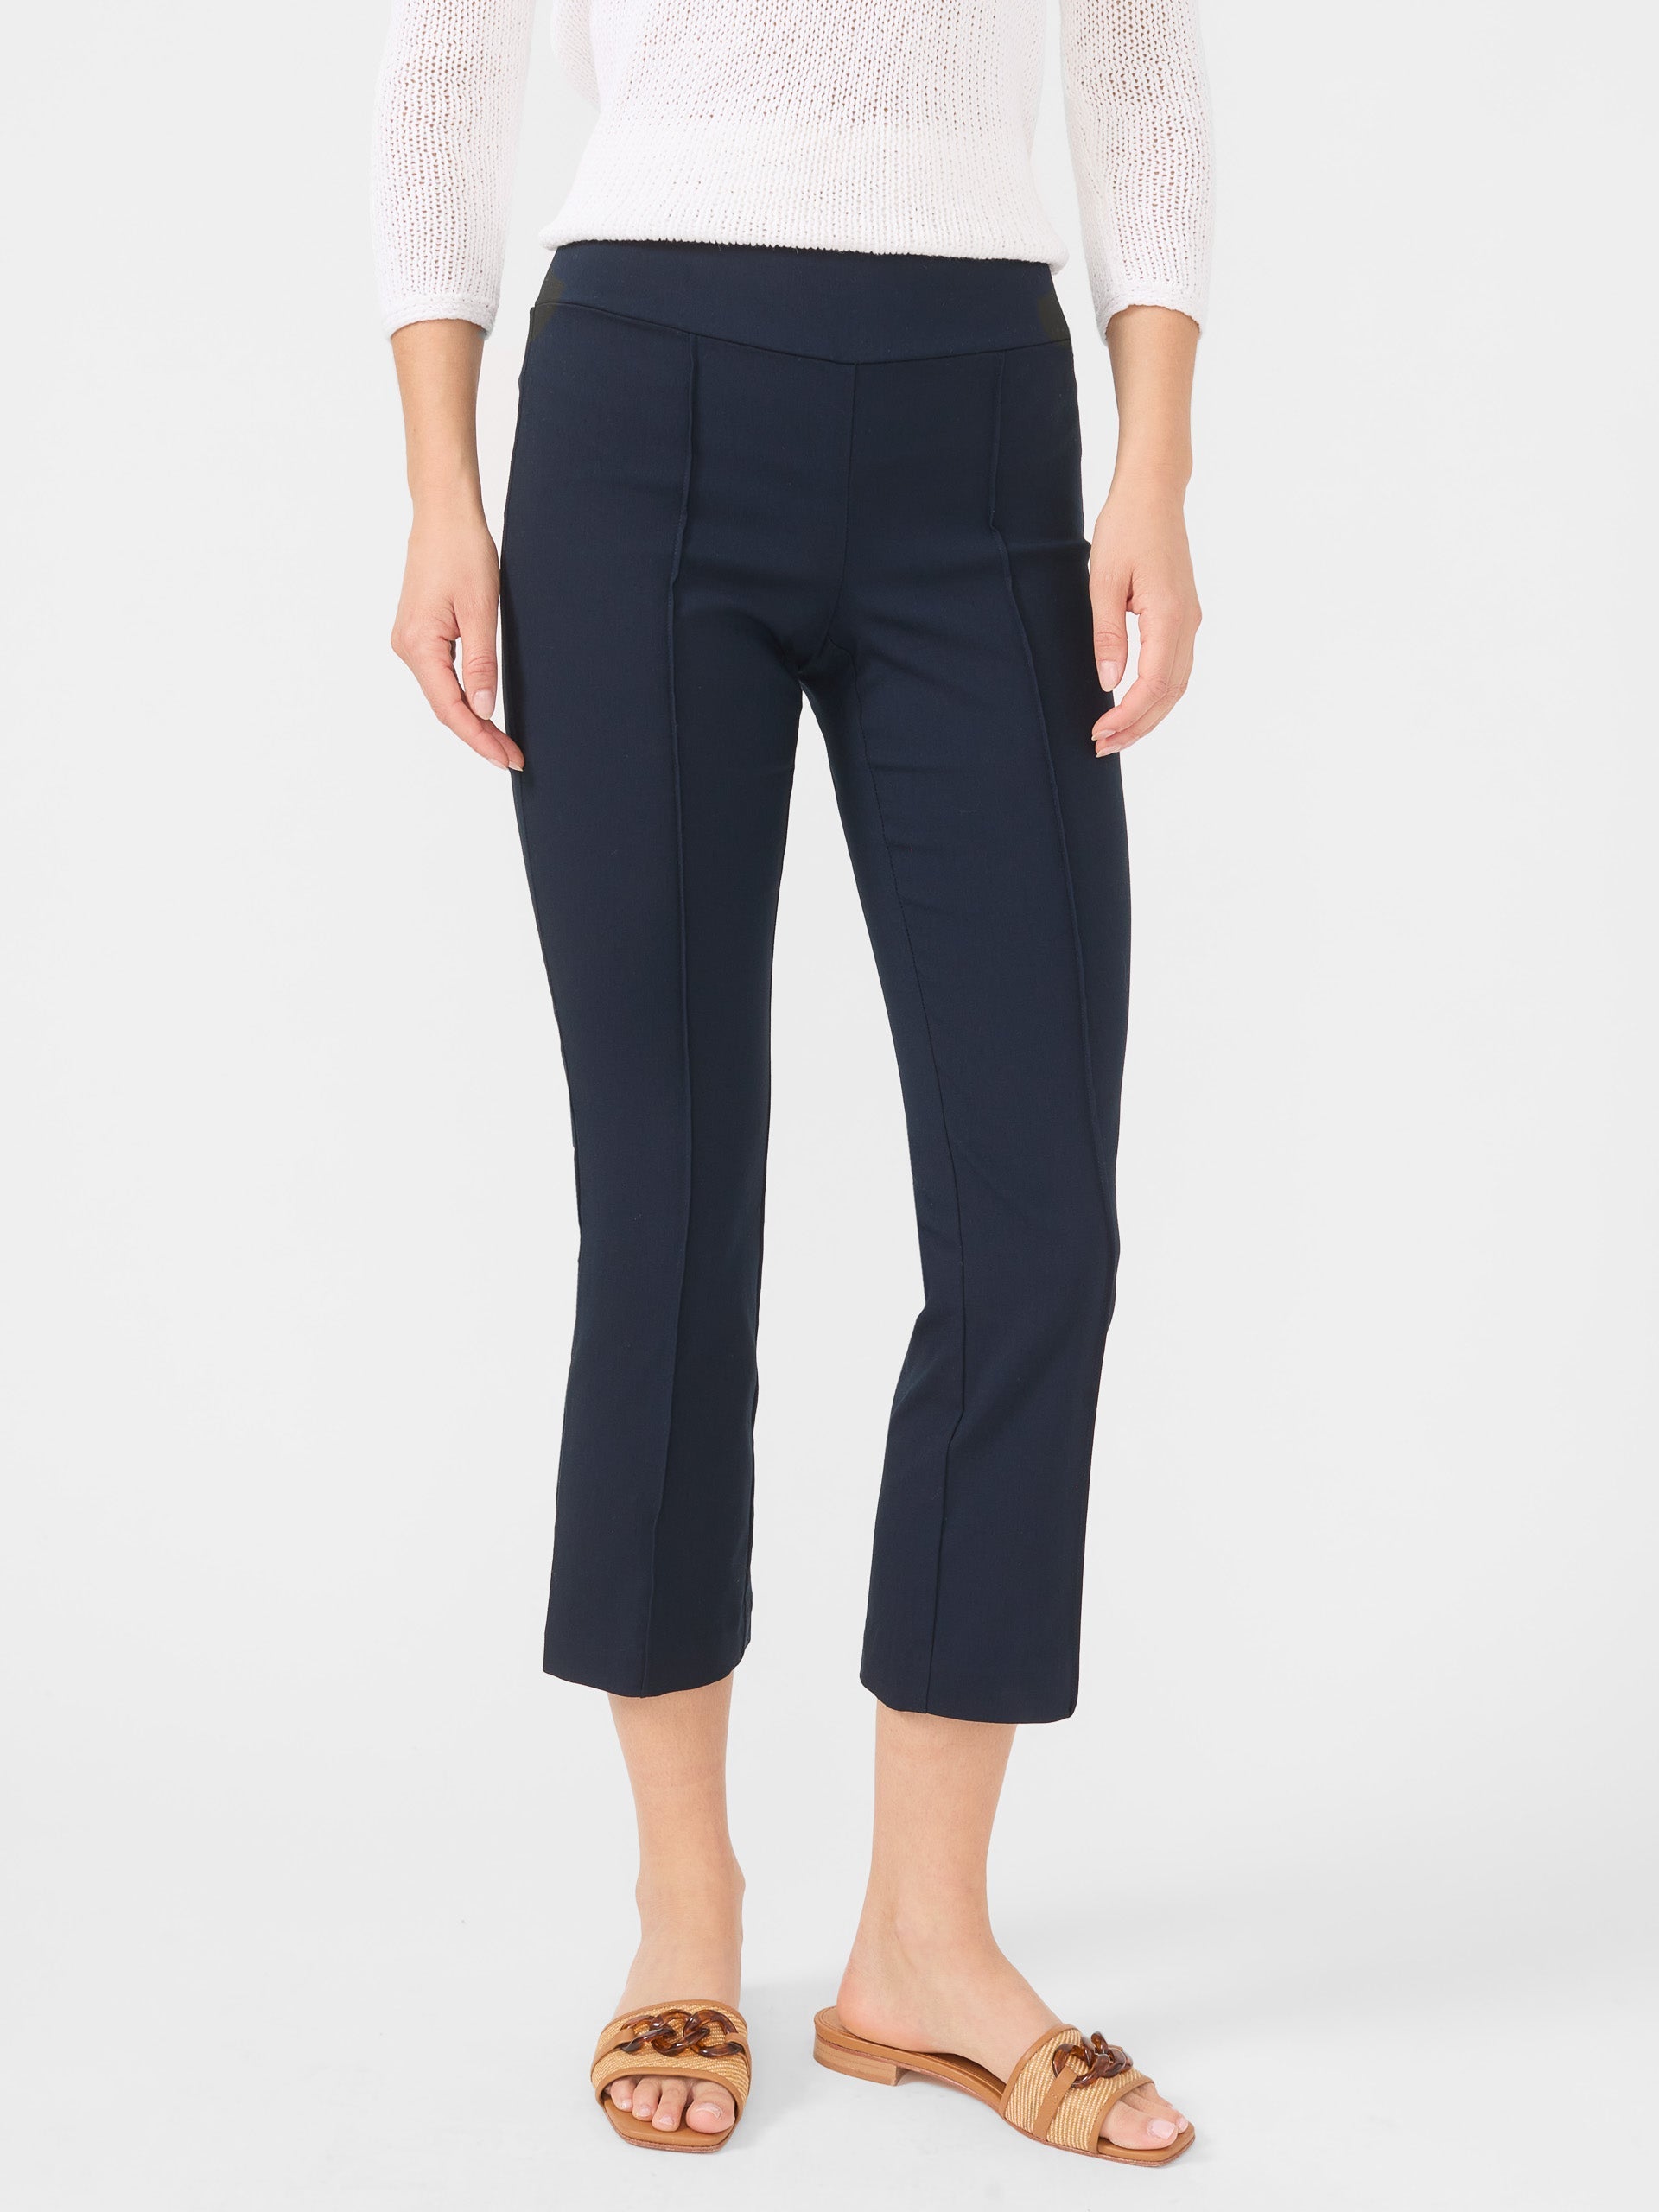 J.McLaughlin Ivy Front Seam Detailed Kick Flare Hem Cropped Pull-On Pants